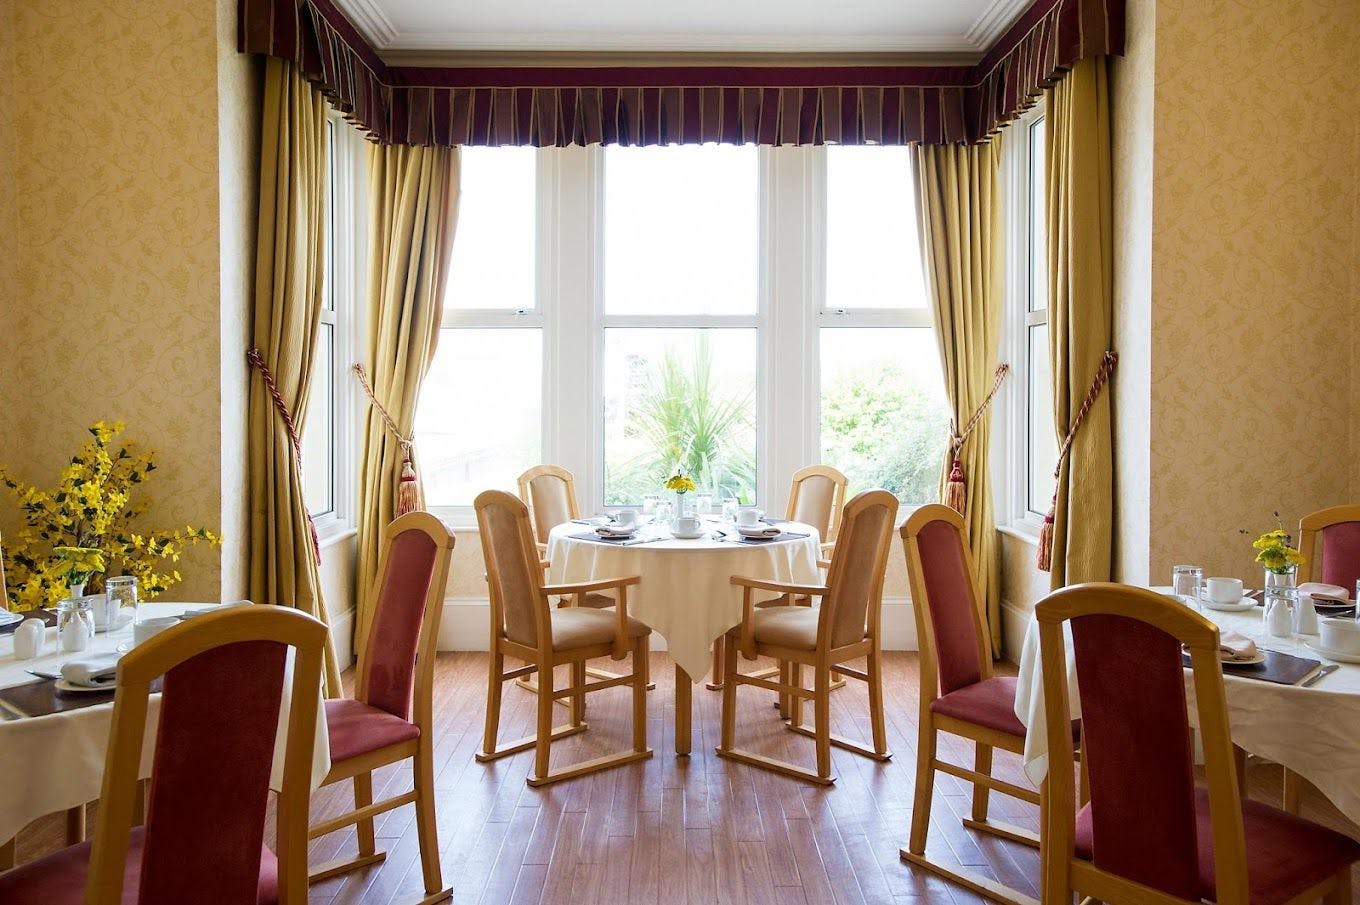 Dining Room at Beach Lawns Care Home in Somerset, South West England